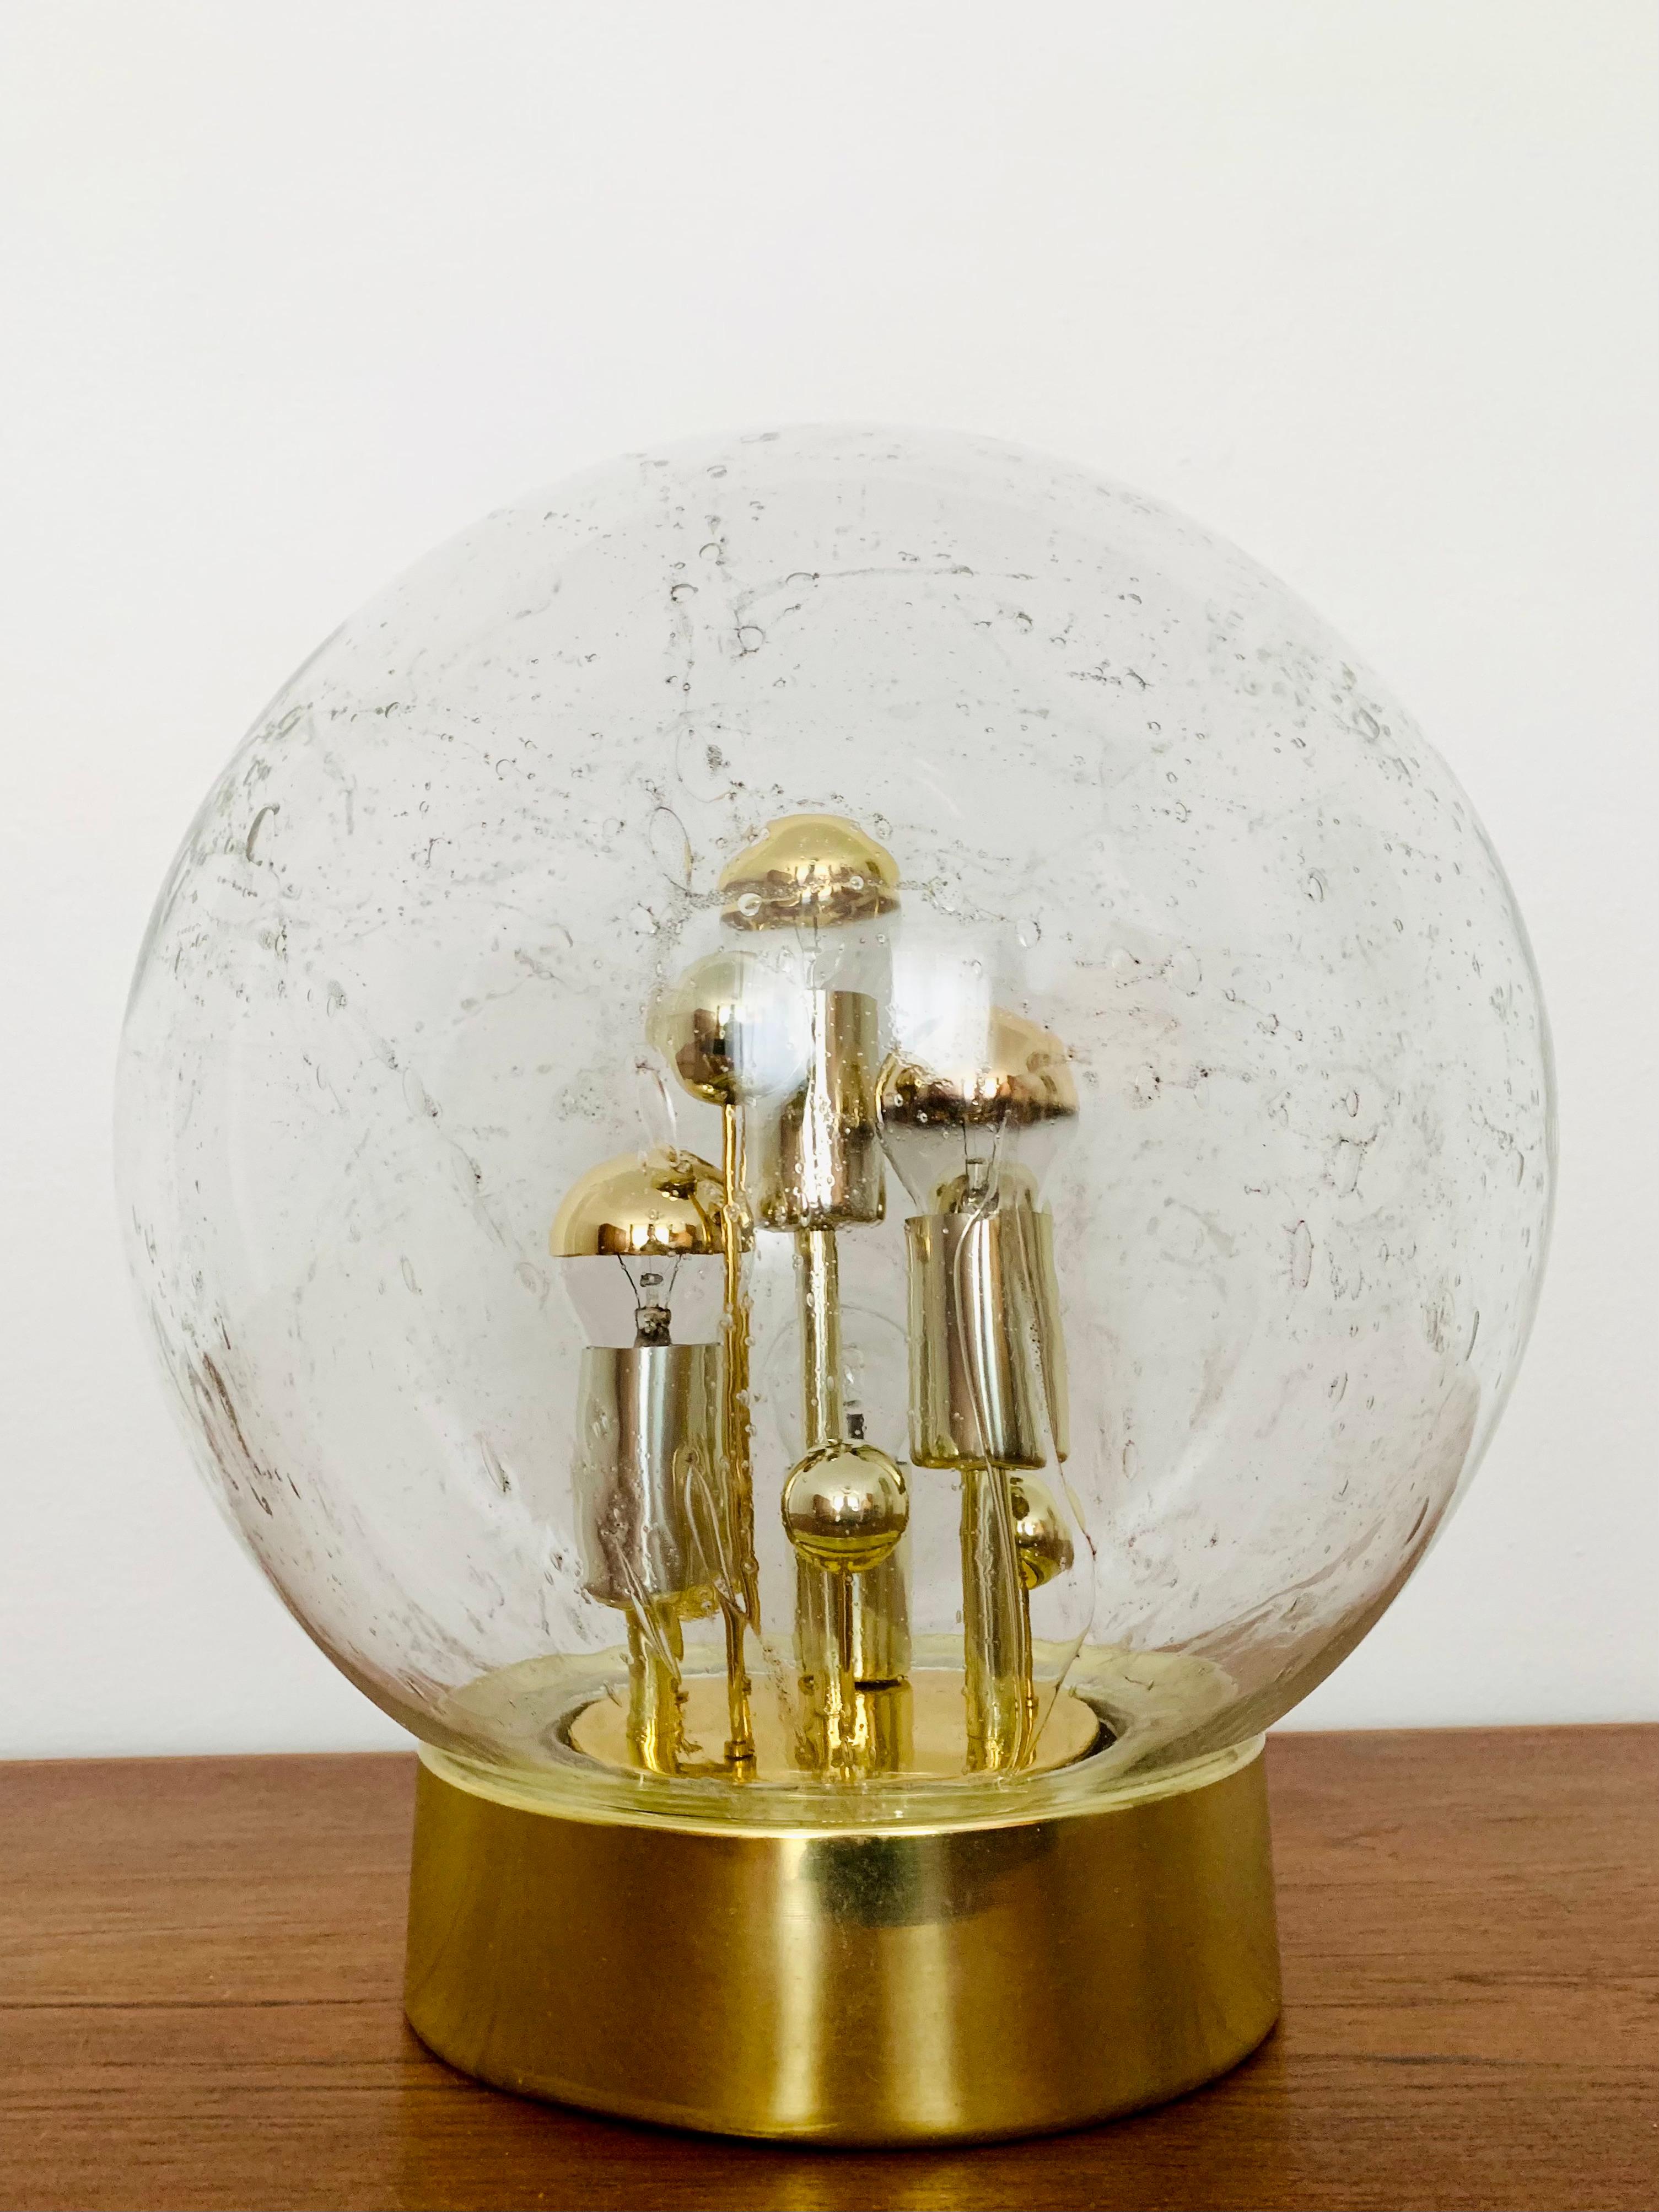 Very beautiful and large golden Big Ball table lamp by Doria from the 1960s.
Very elegant Hollywood Regency design with a fantastically glamorous look.
The structure in the glass creates a spectacular sparkling light.

Manufacturer: